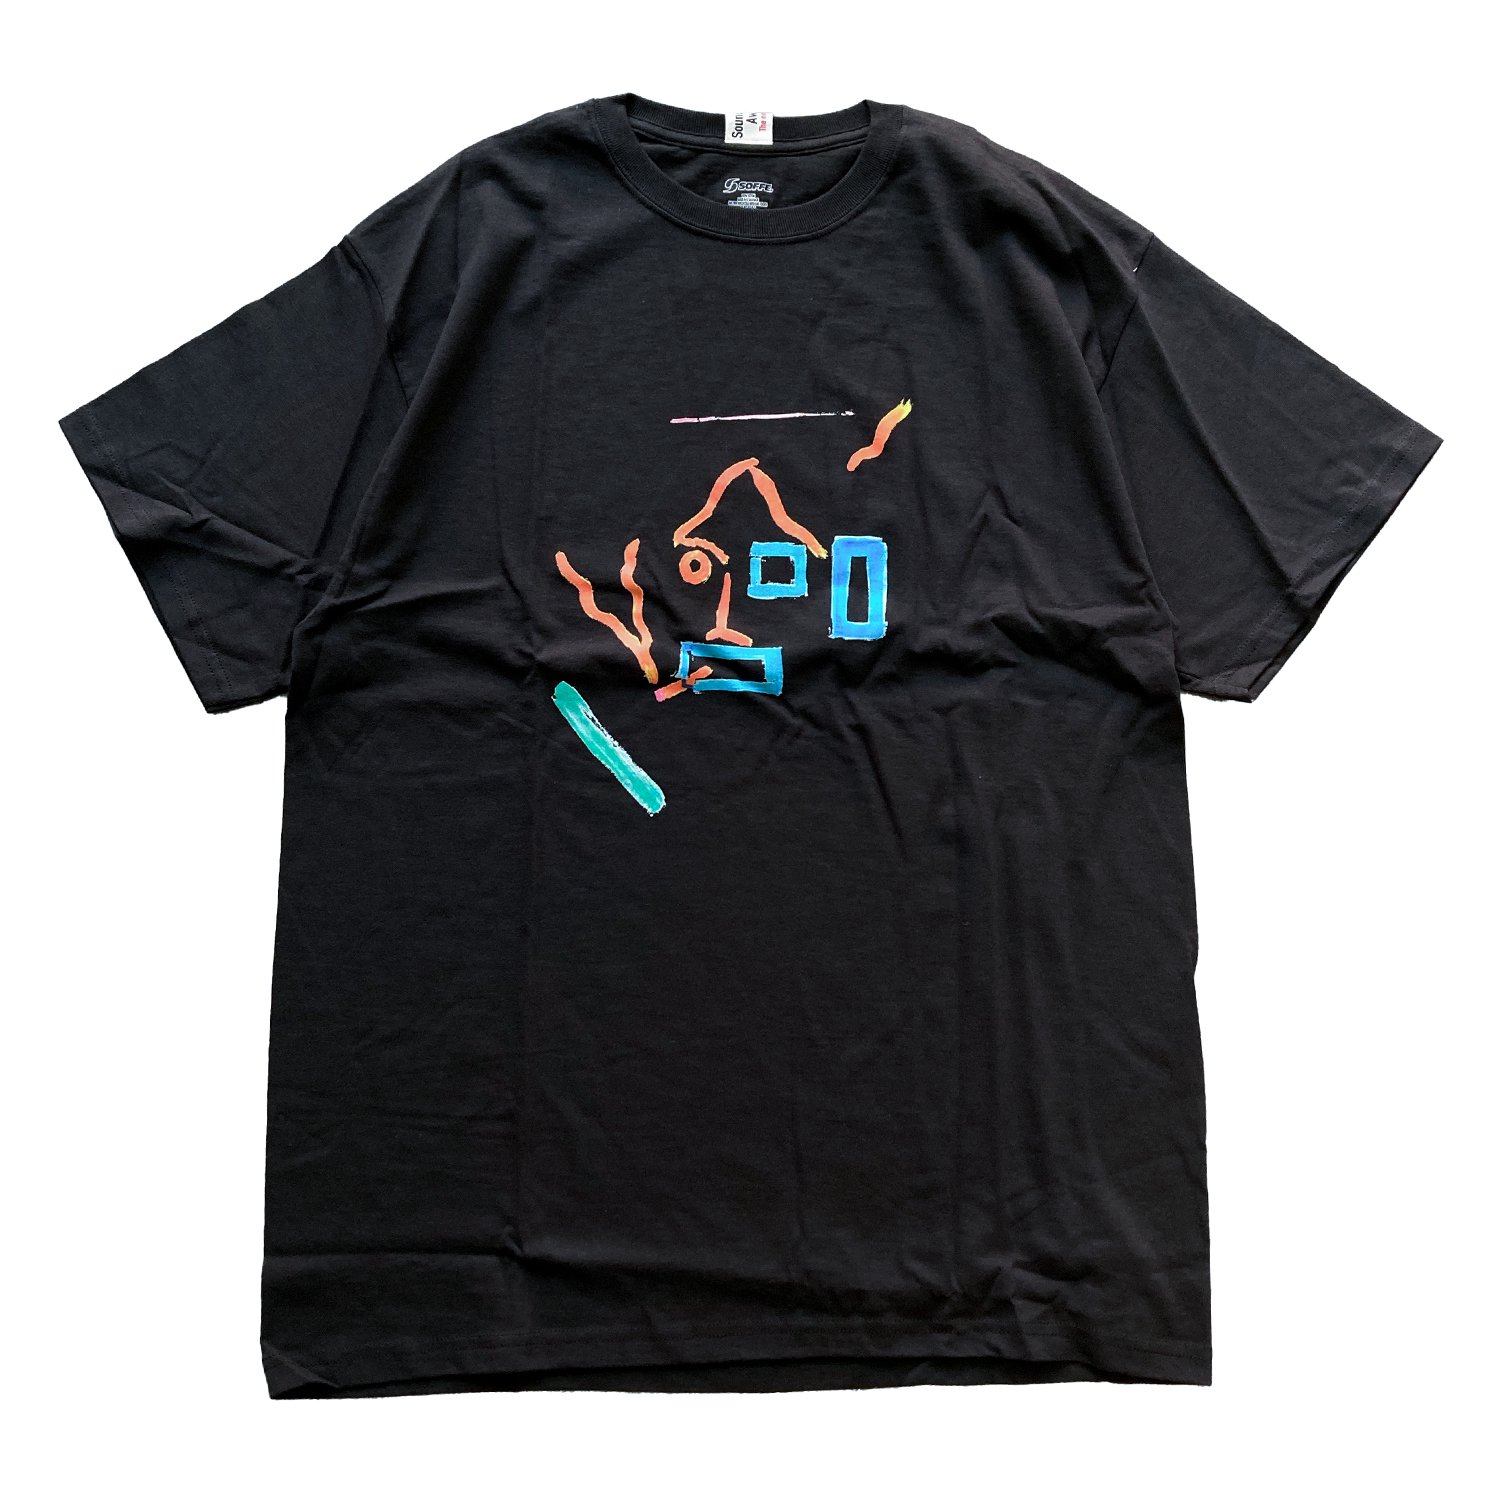 <img class='new_mark_img1' src='https://img.shop-pro.jp/img/new/icons8.gif' style='border:none;display:inline;margin:0px;padding:0px;width:auto;' />SOUNDS AWESOME / HOSONO T-shirt